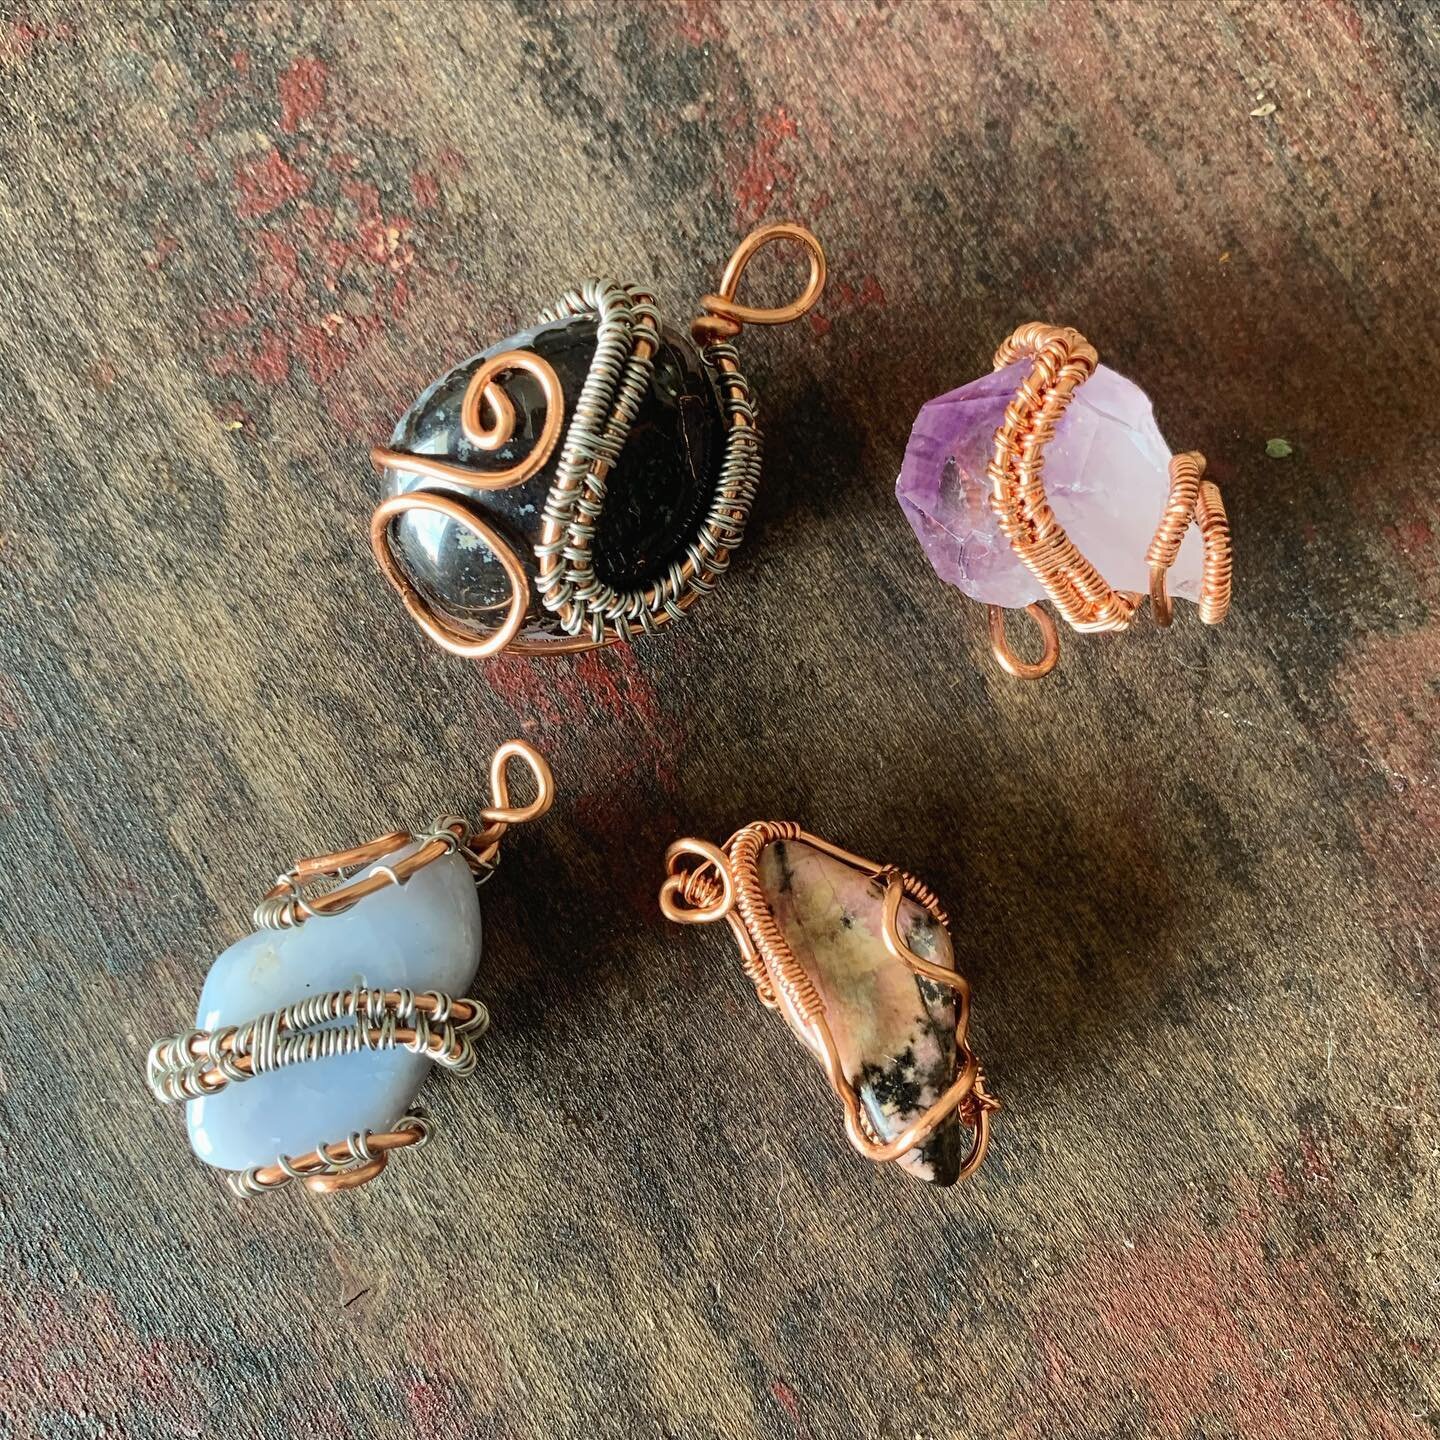 @lyricsvoyage has been creating some gorgeous wire wrapped beauties for you all. These are now available to add to your favorite jewelry. 🖤